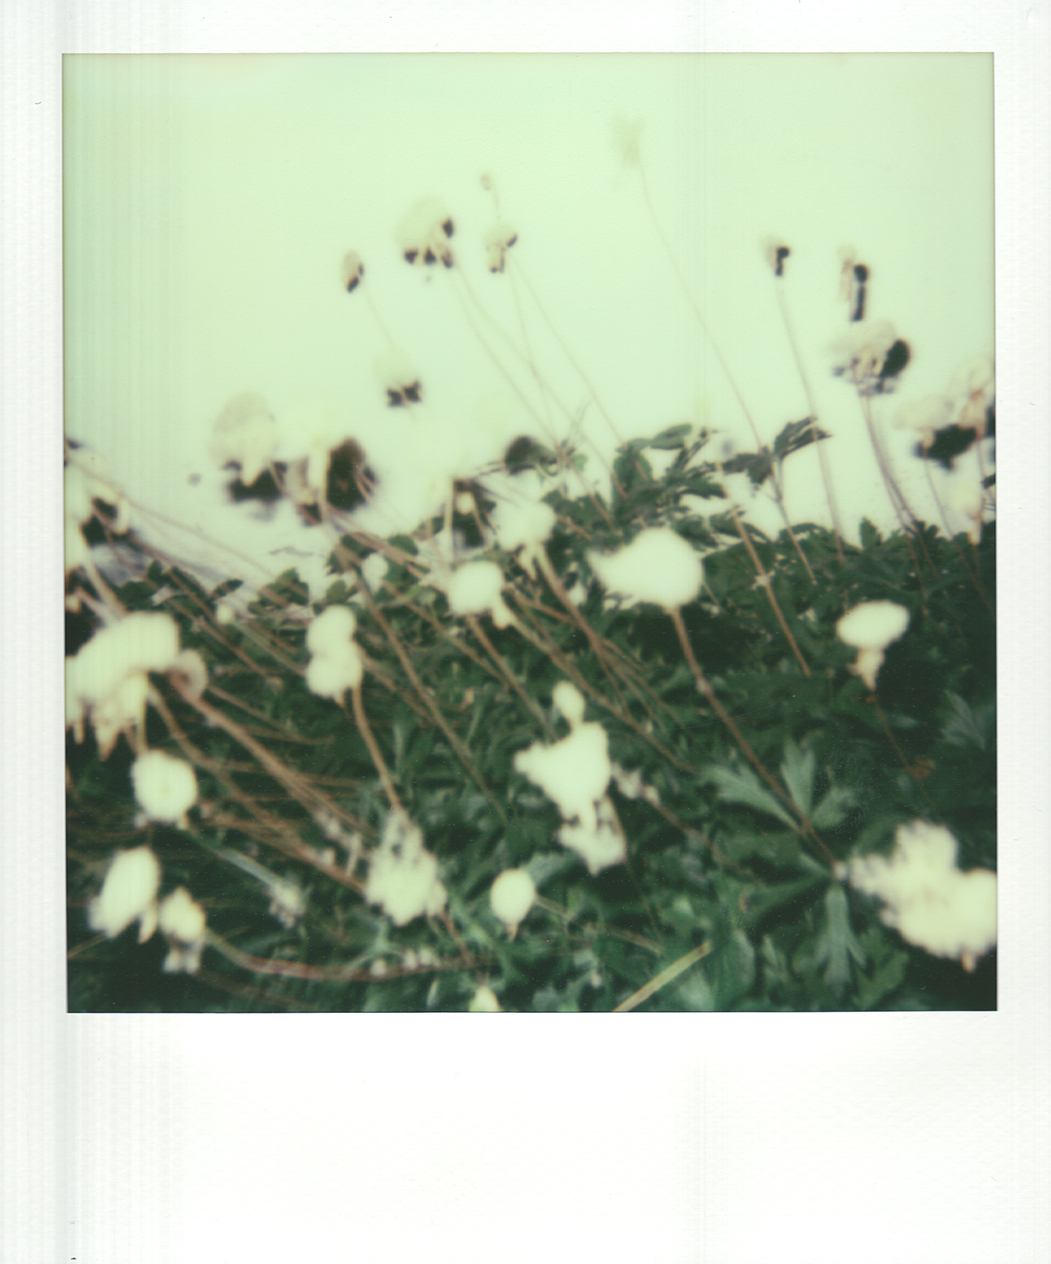 impossibleproject   colorshade instant POLAROID SX-70 camera600 #sweden   #gotland #Austin summer PX70 px680